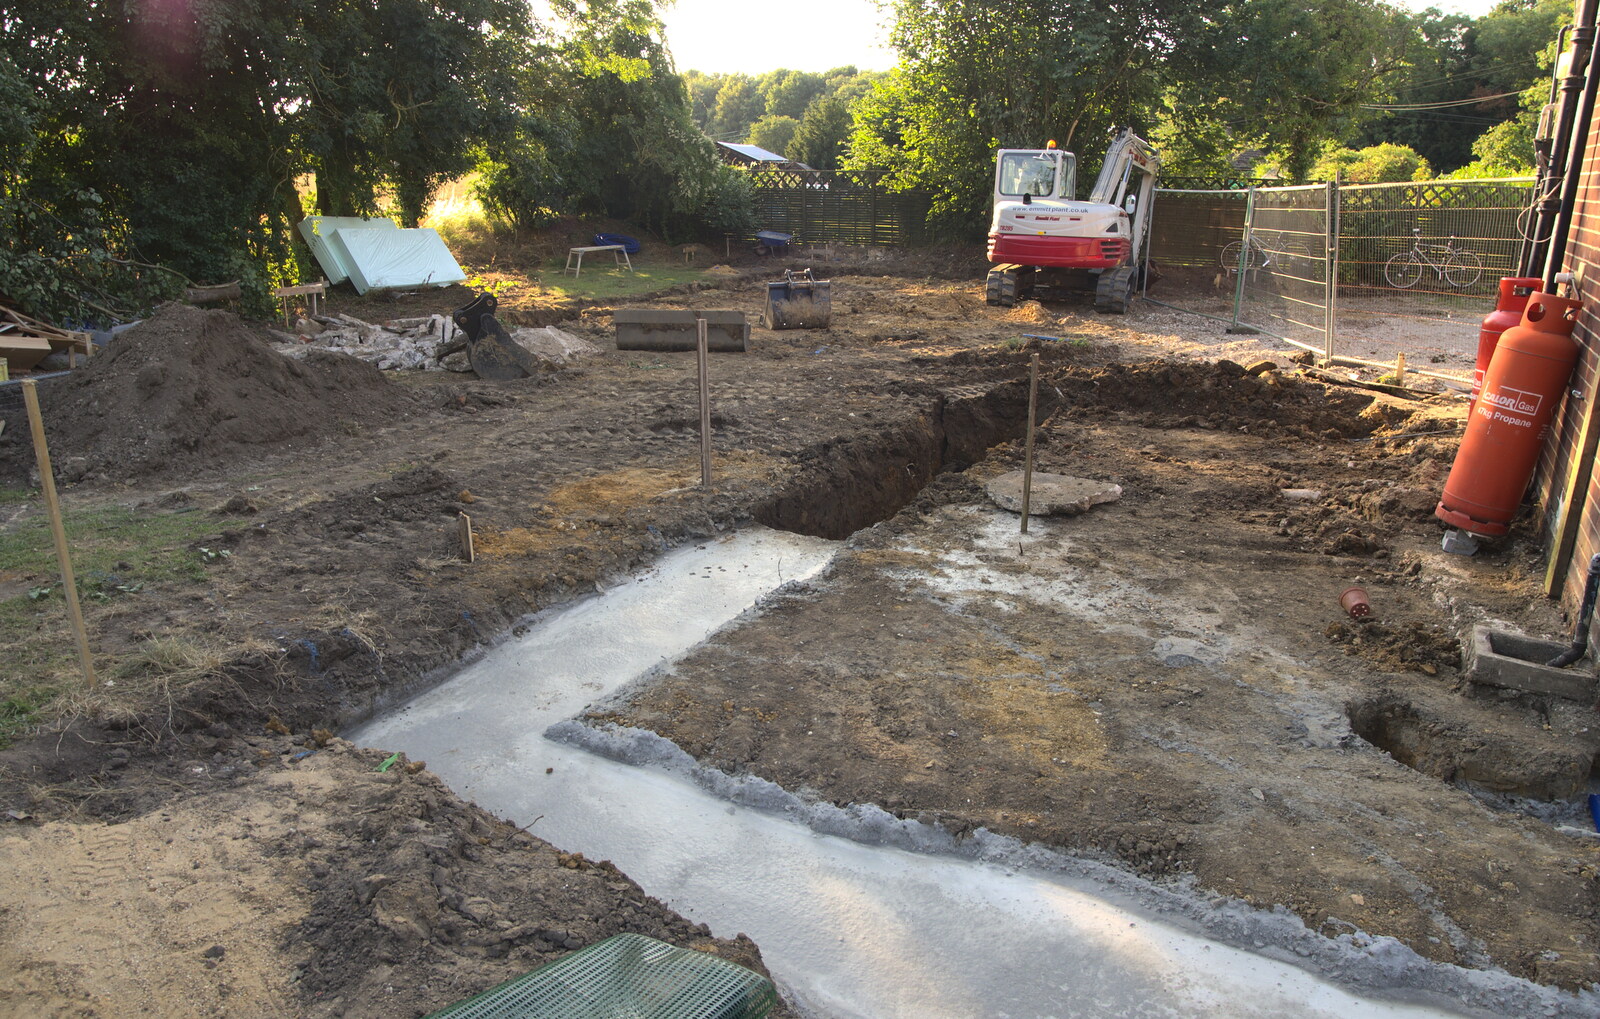 The first two loads are set from Grand Designs: Building Commences, Brome, Suffolk - 8th August 2013